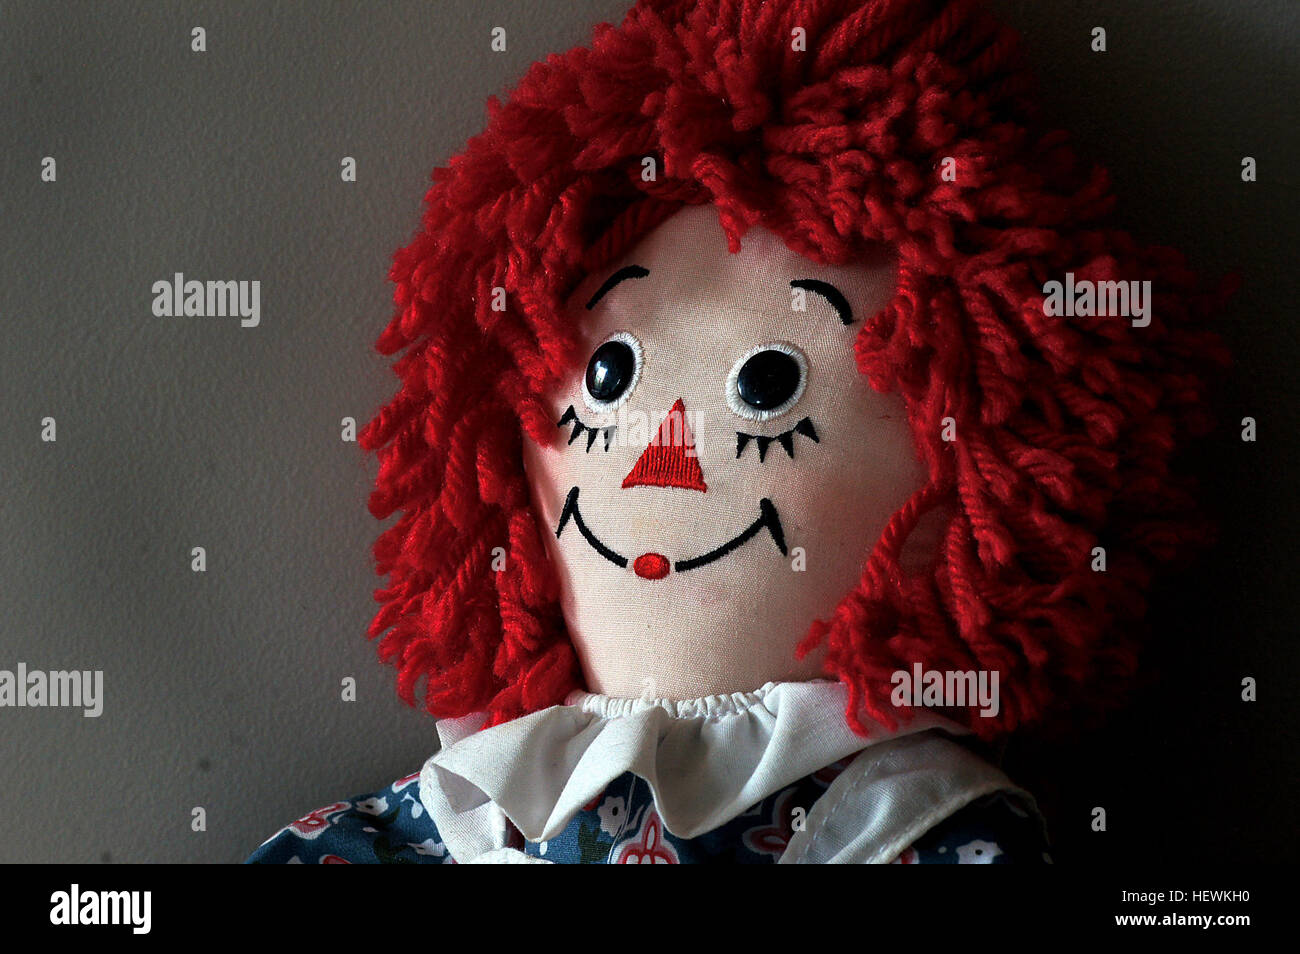 Raggedy Ann is a fictional character created by American writer Johnny Gruelle in a series of books he wrote and illustrated for young children. Raggedy Ann is a rag doll with red yarn for hair and has a triangle nose. Stock Photo